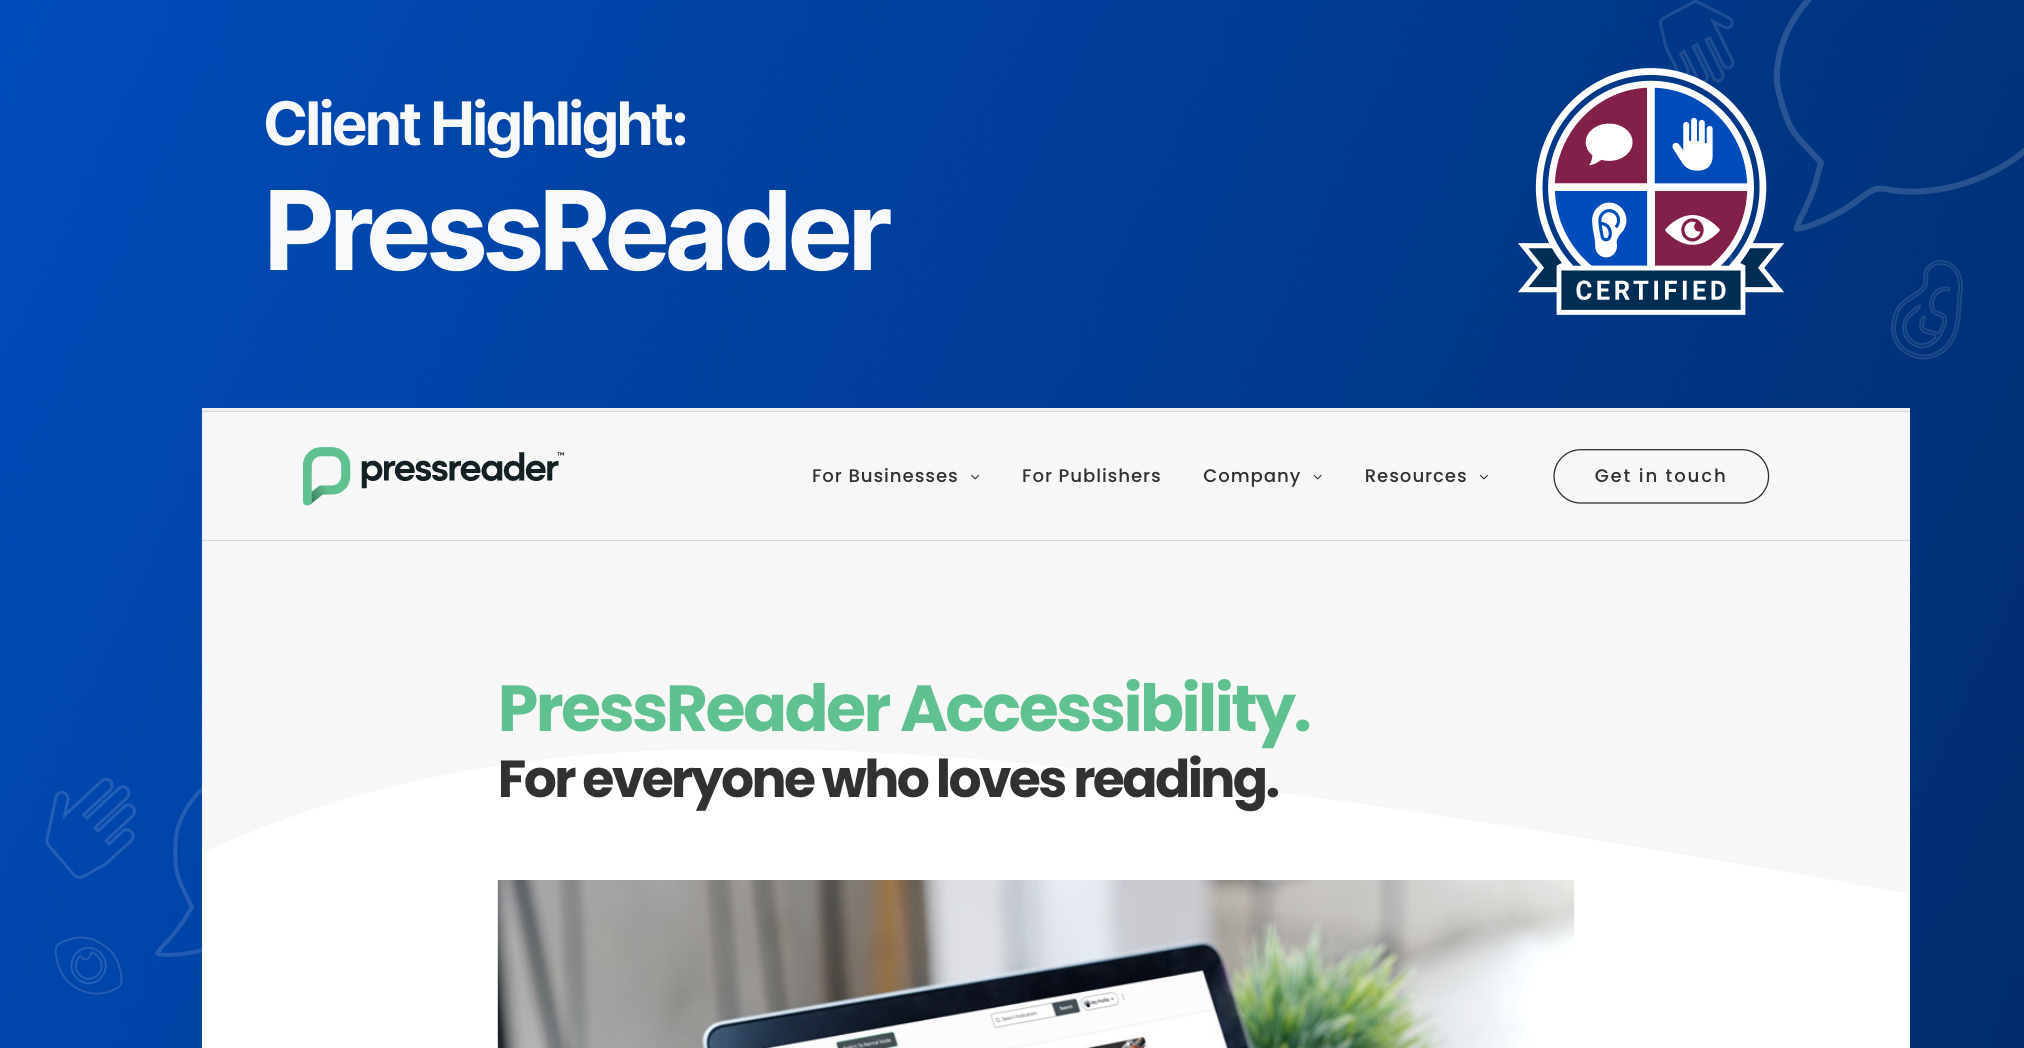 Client Highlight Image of PressReader's blog post on accessibility.